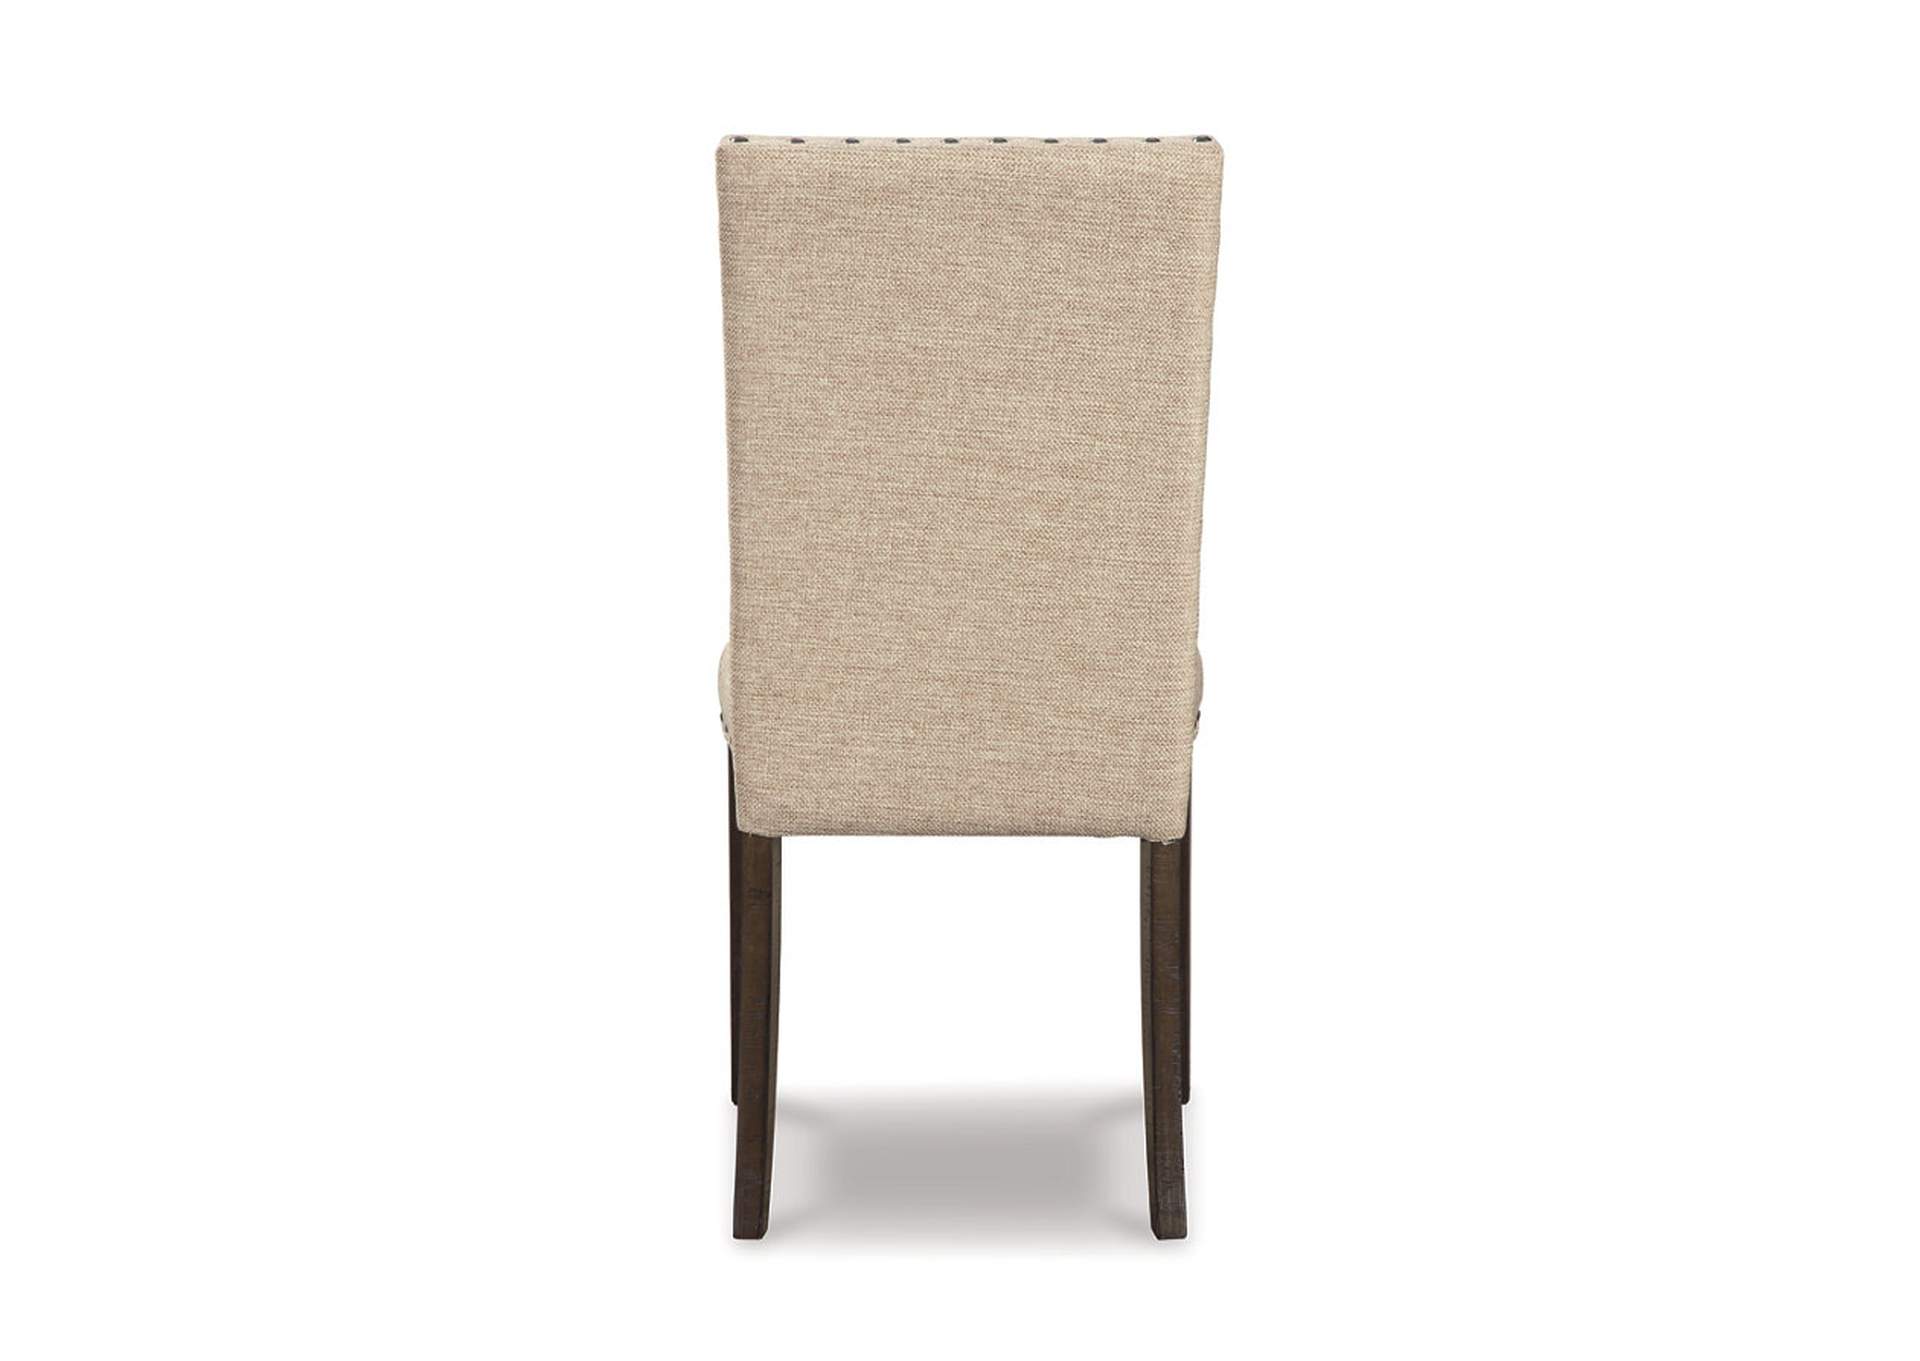 Rokane Dining Chair,Signature Design By Ashley